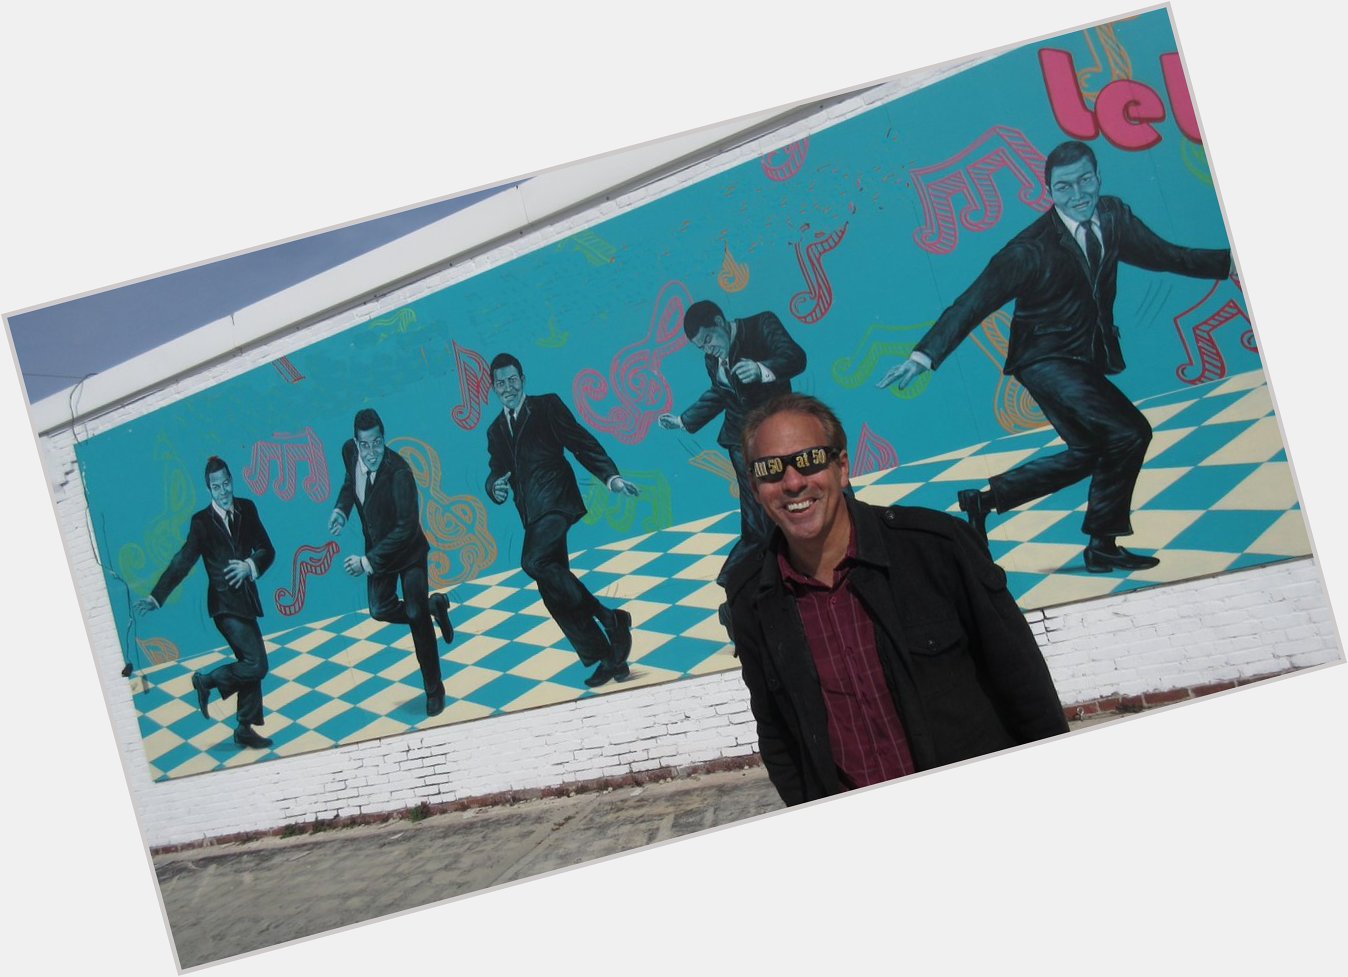 10/3 Happy Birthday Chubby Checker...here at the Chubby Check Mural in Wildwood, New Jersey 